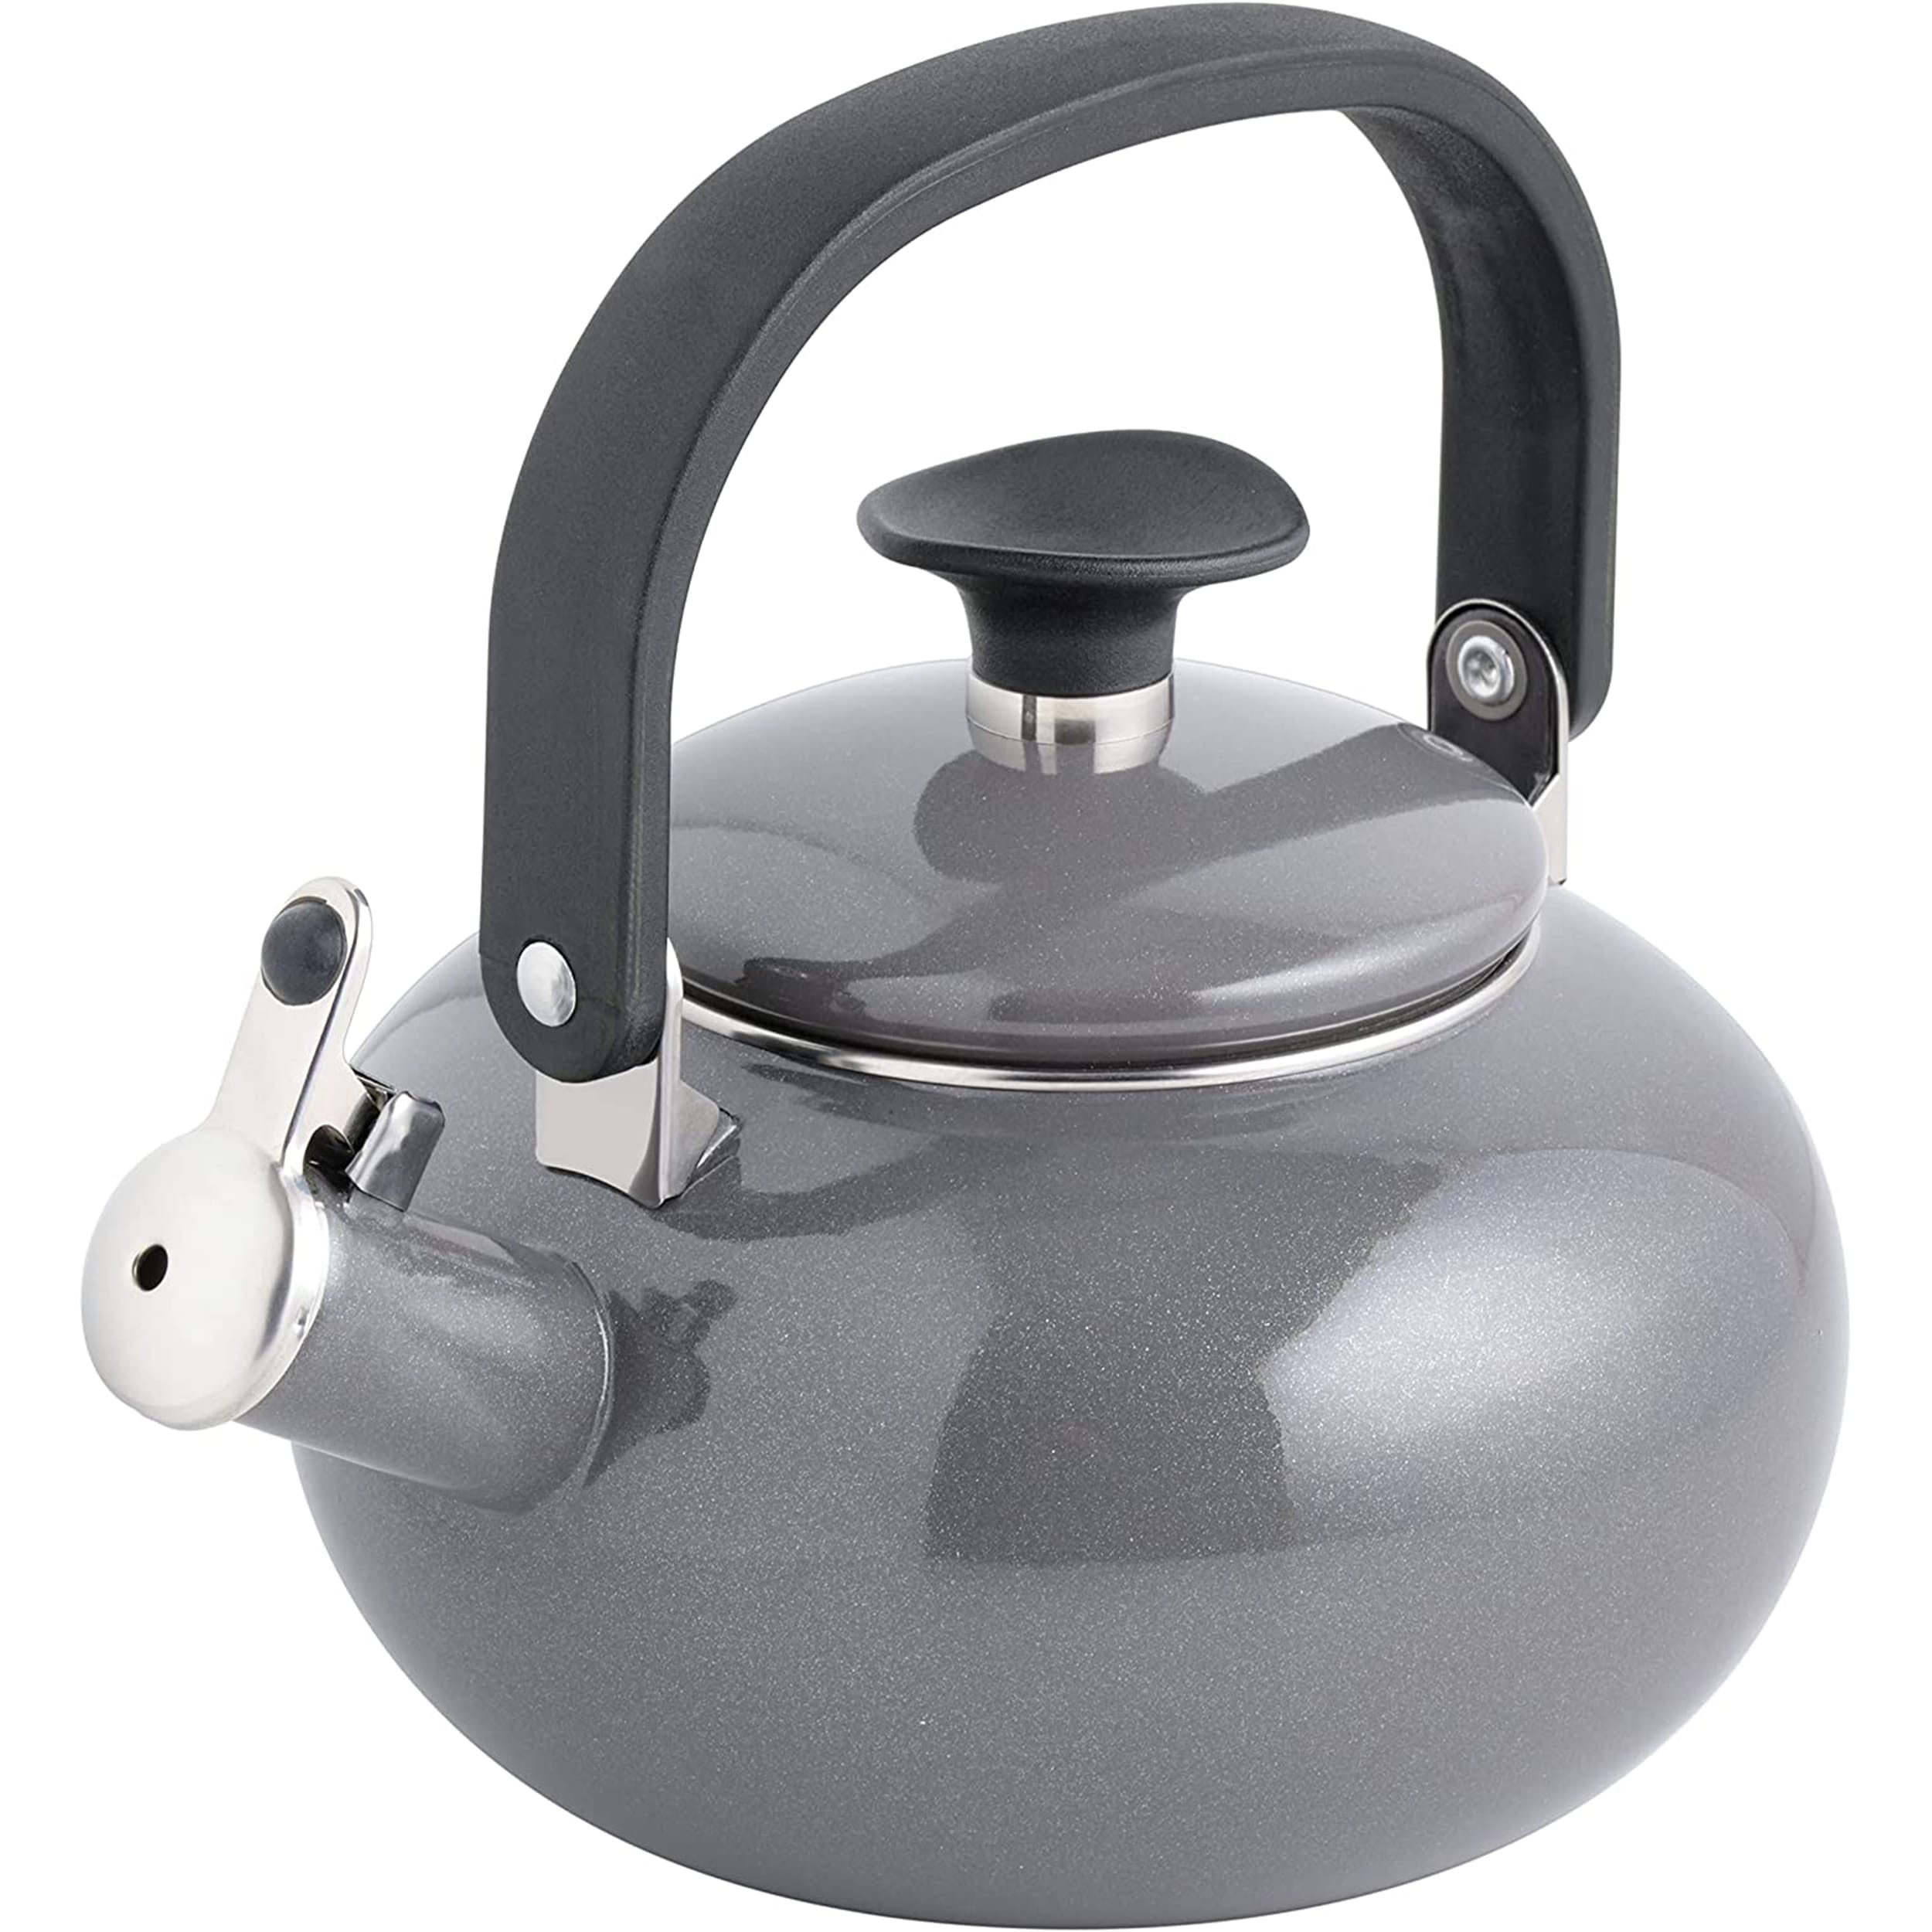 Elitra Stove Top Whistling Fancy Kettle - Stainless Steel Tea Pot with  Ergonomic Handle - 2.7 Qt / 2.6 L - Satin 